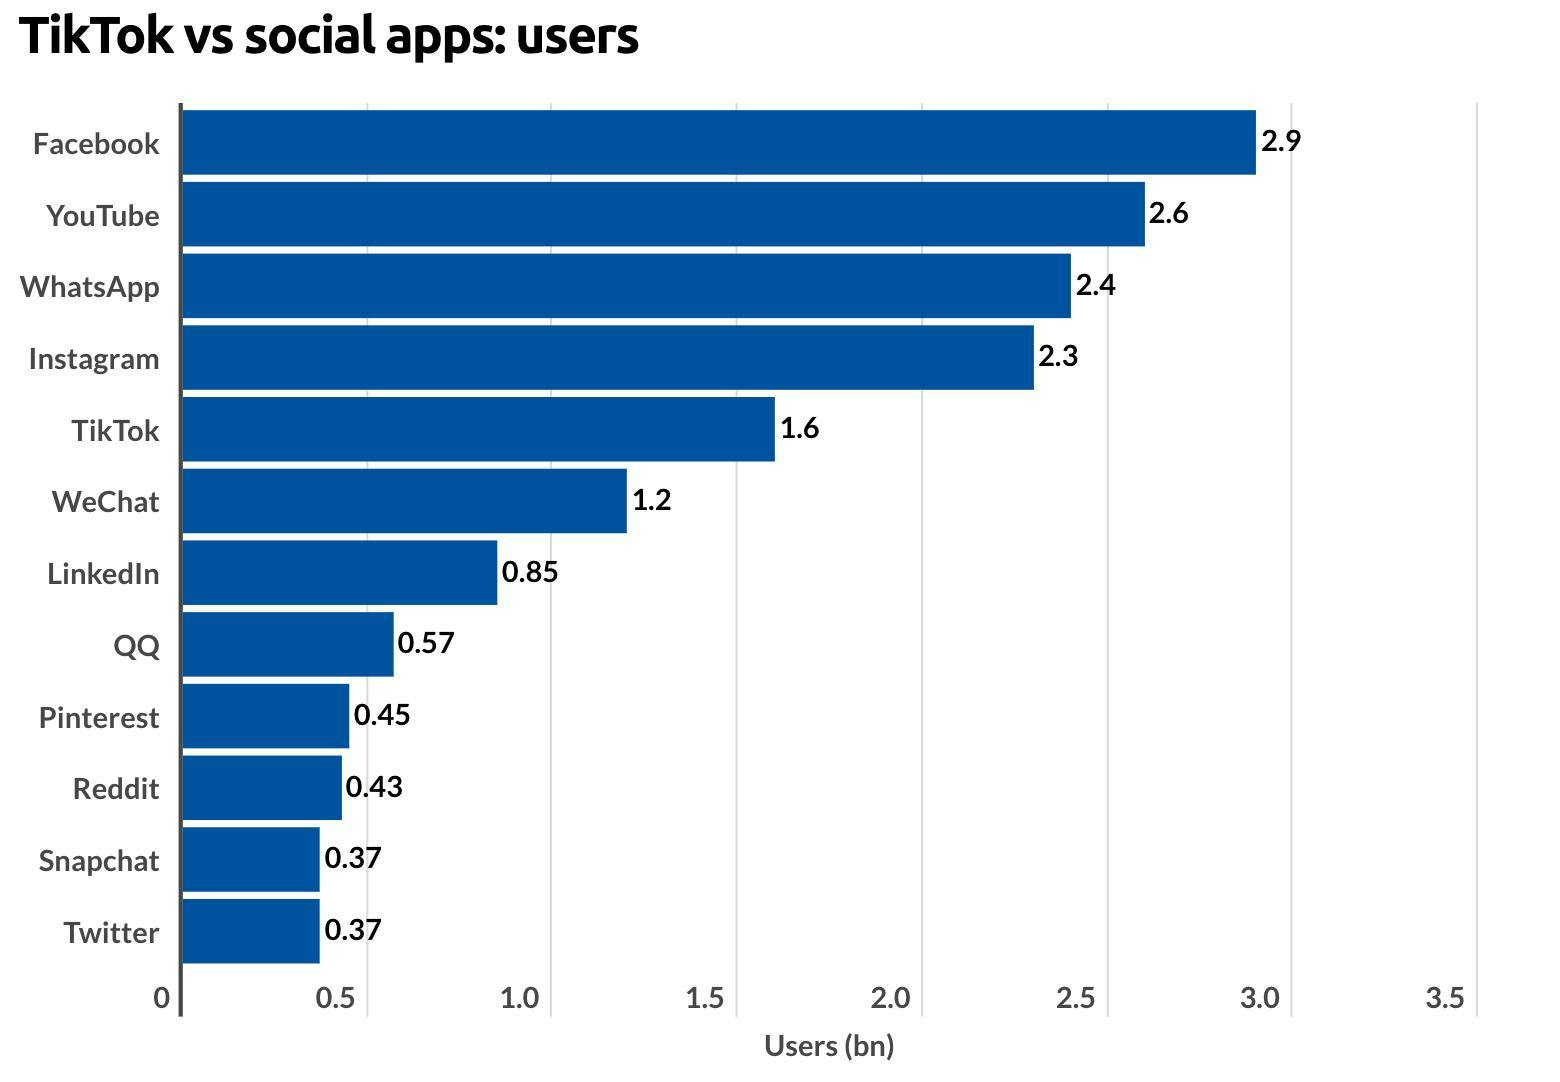 TikTok vs. social apps: A chart from Business of Apps showing that TikTok ranks 4th among the top social media apps in number of users.